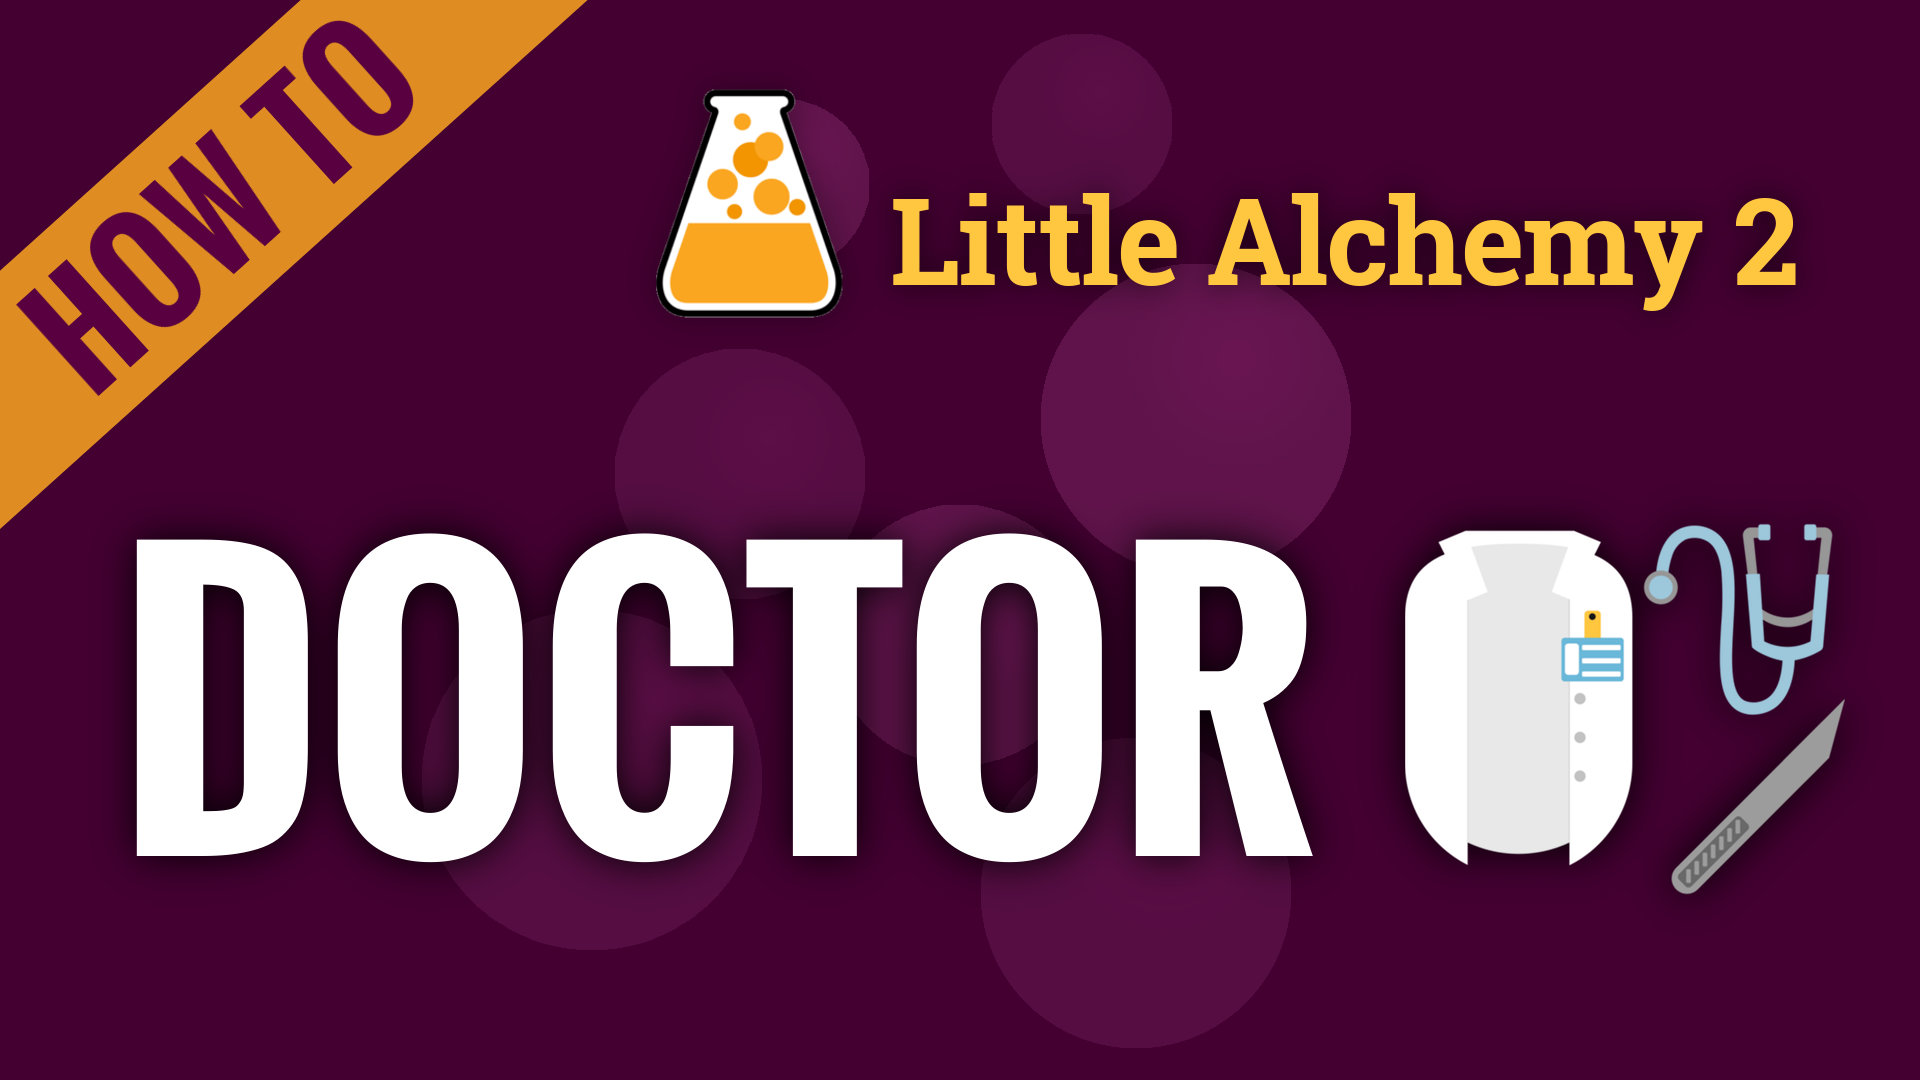 How To Make The Doctor In Little Alchemy 2